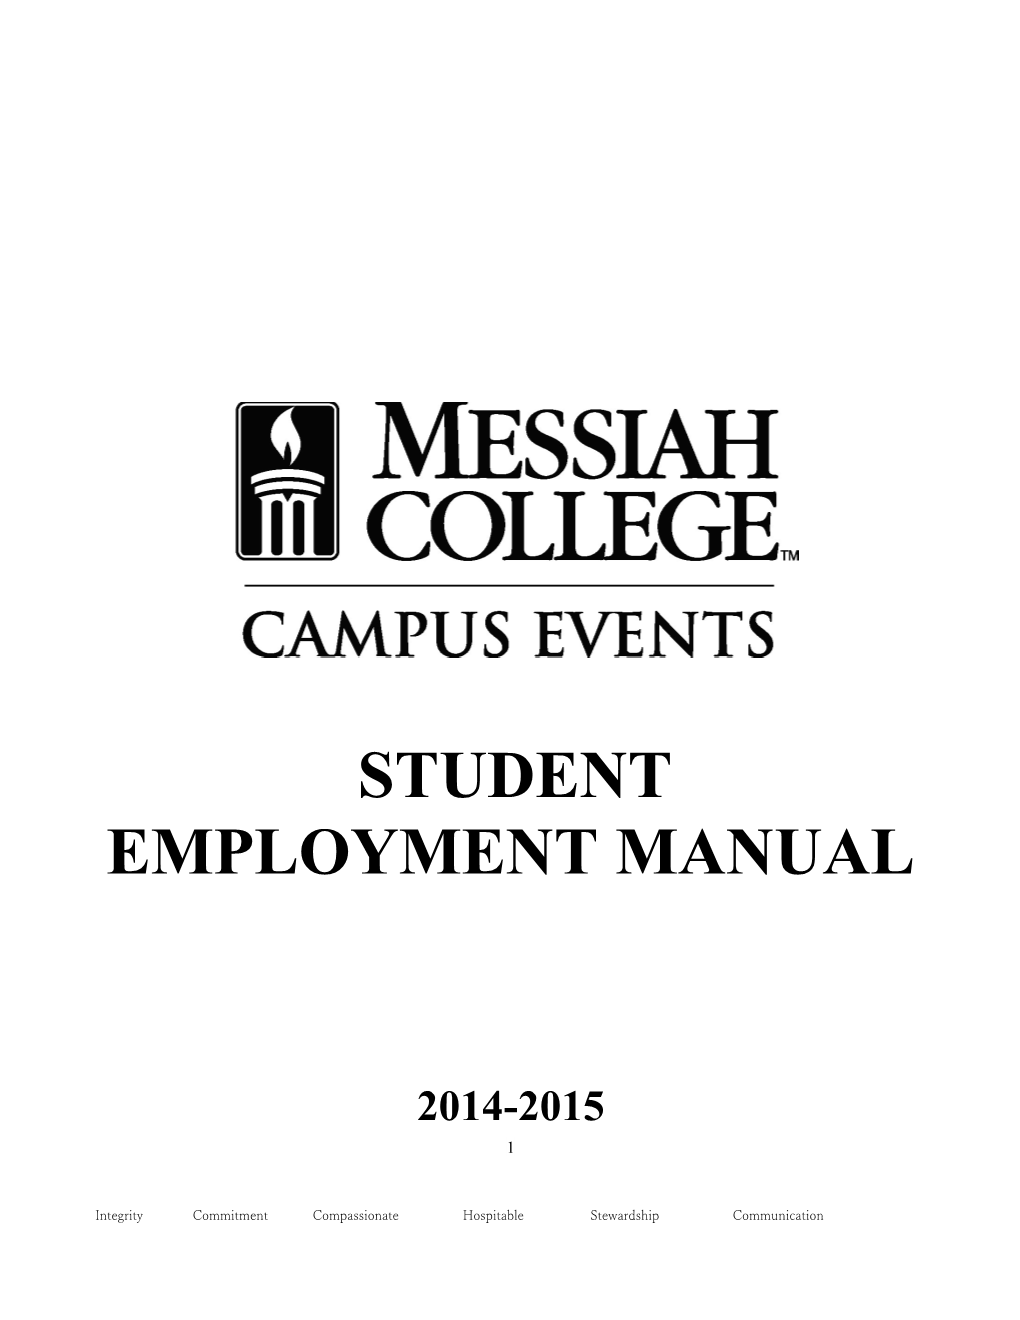 Student Employment Manual